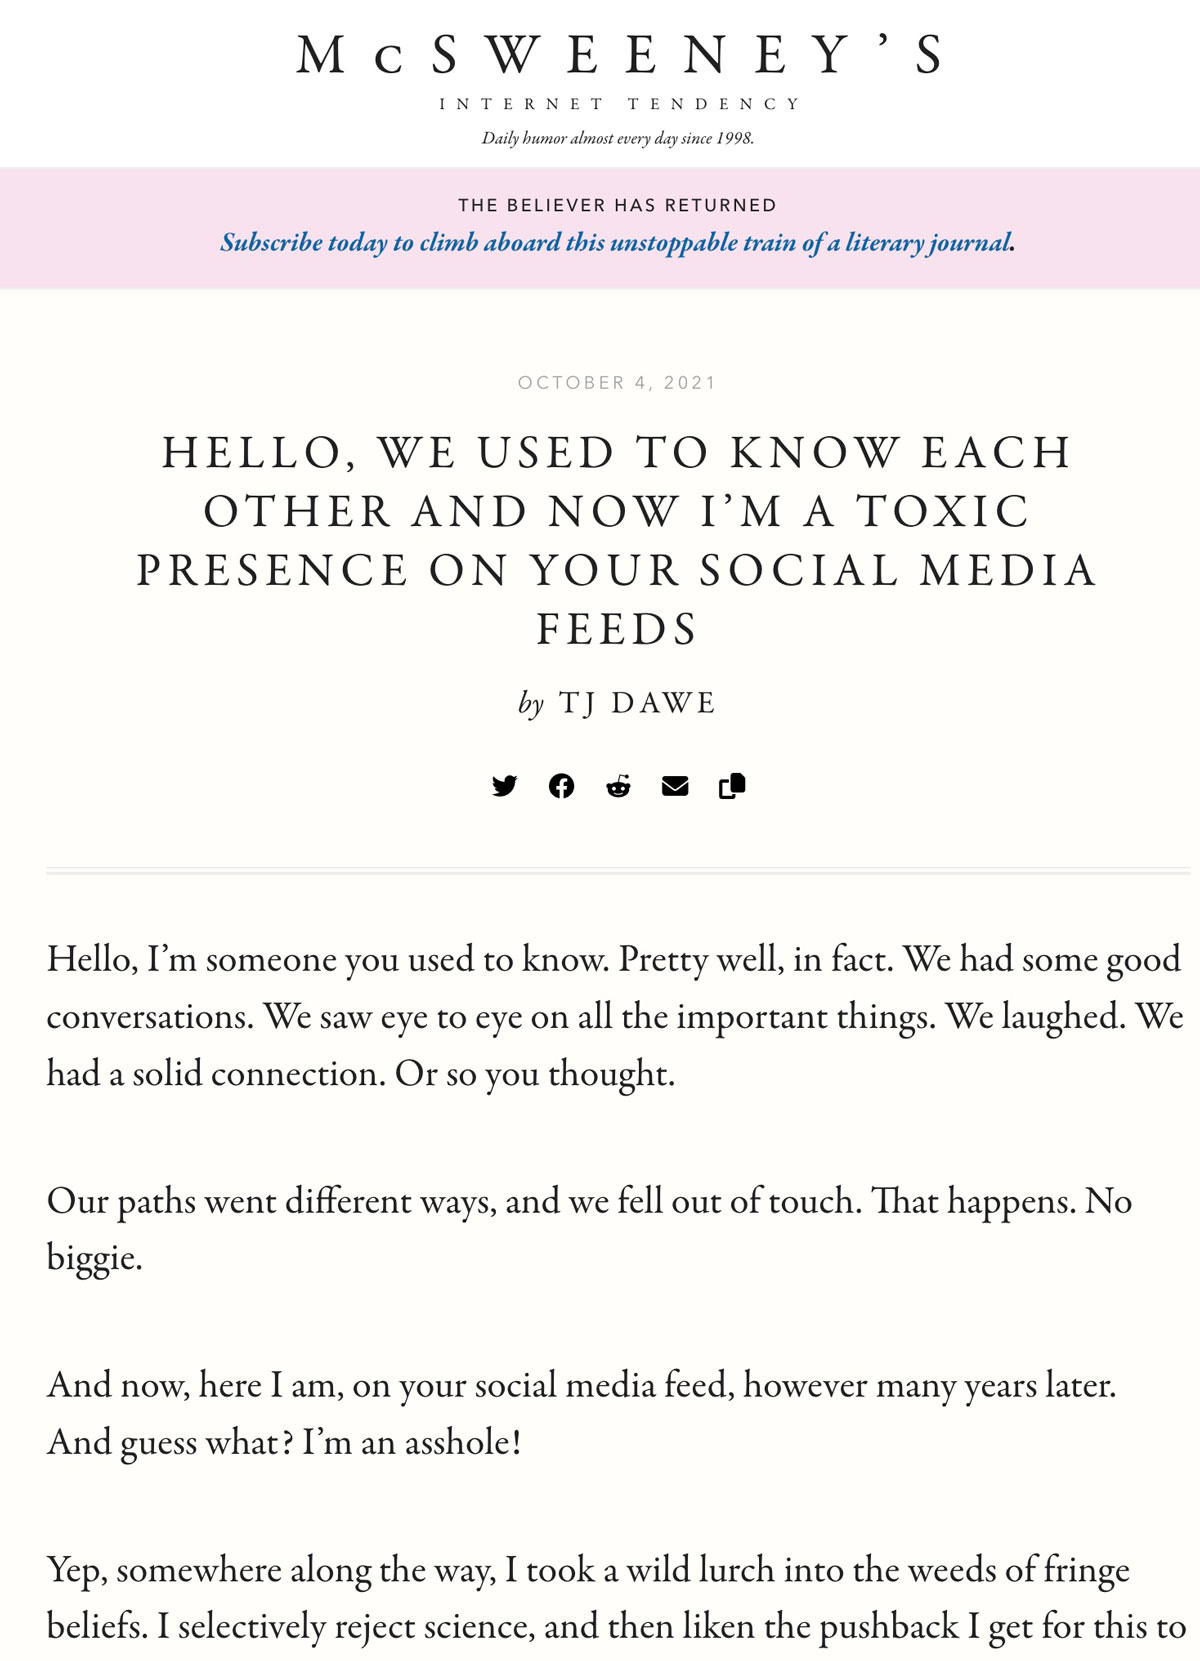 McSweeney's: Hello, We Used to Know Each Other